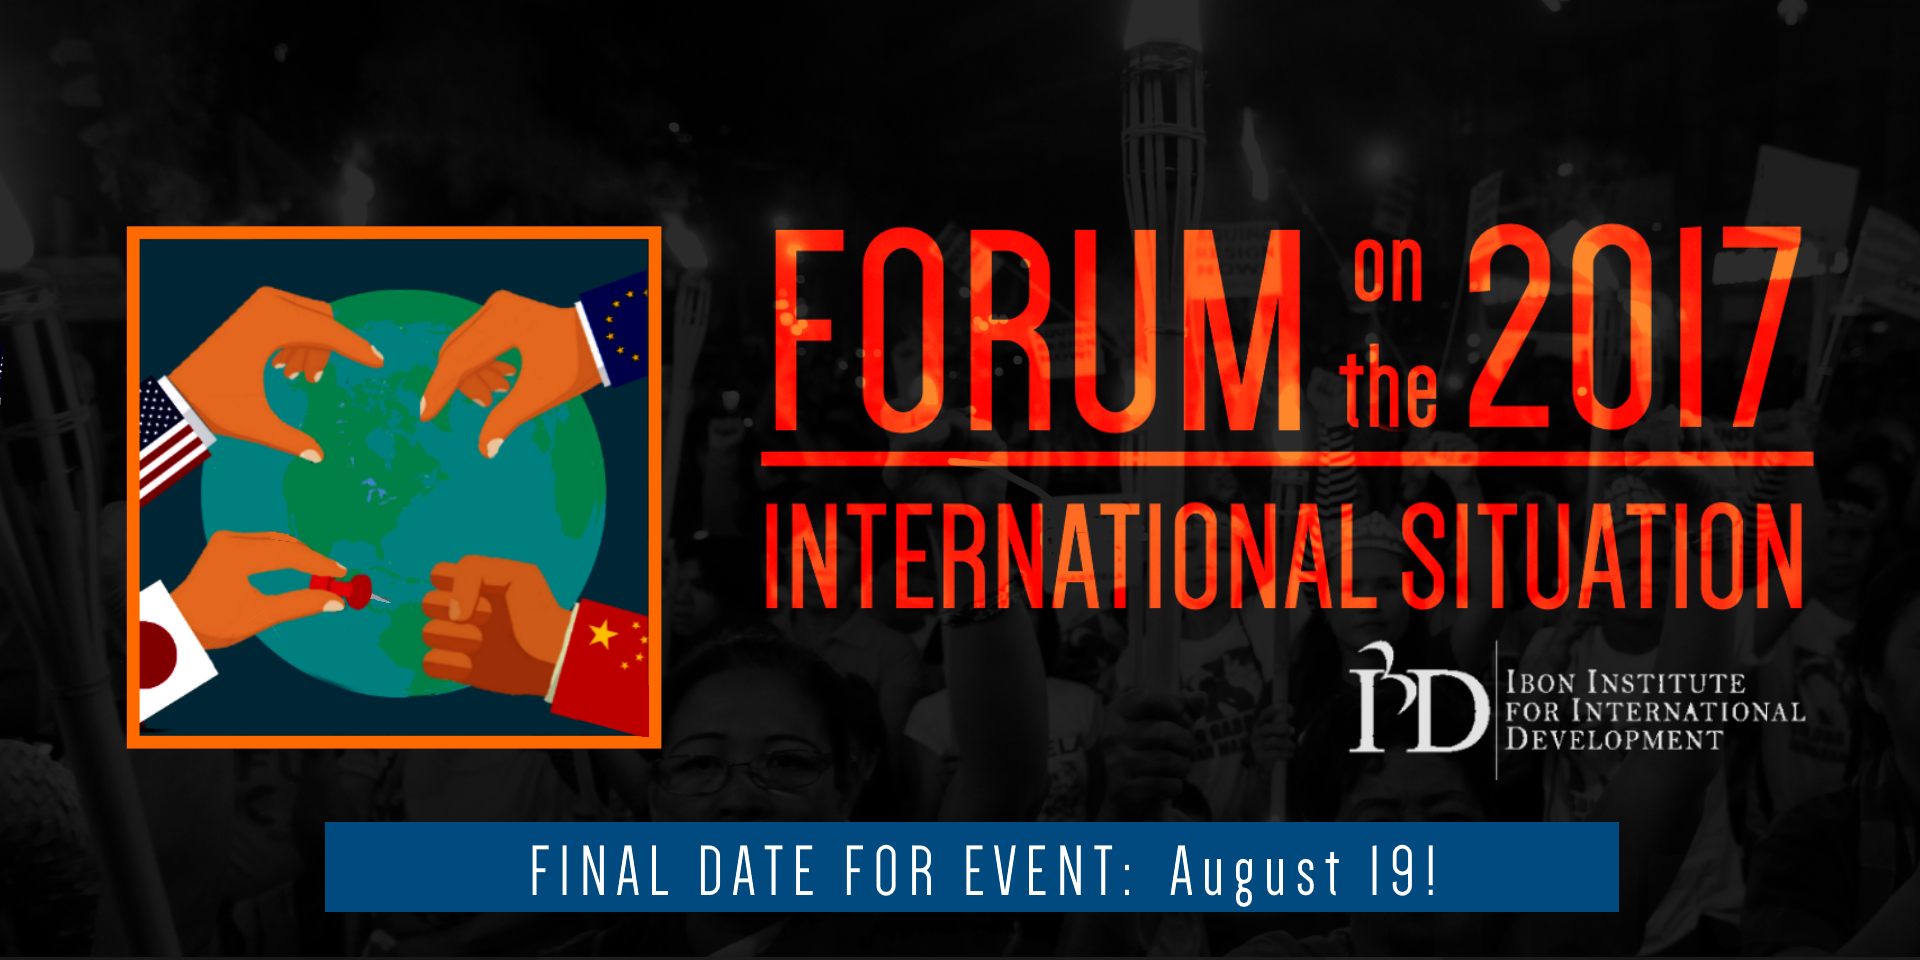 You are currently viewing Forum on the 2017 International Situation